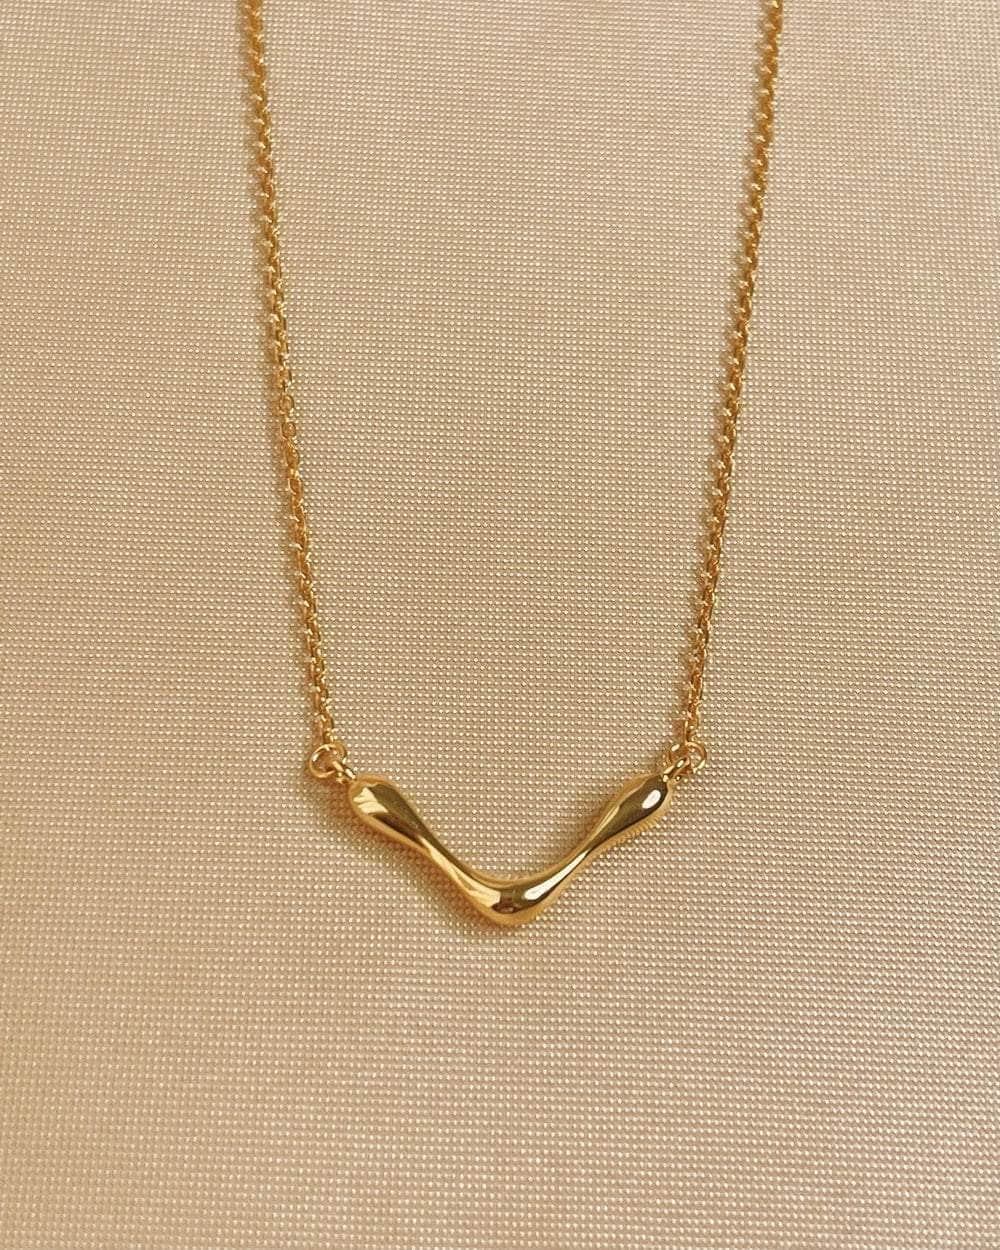 So Dainty Co. Necklaces Leia Gold Necklace Gold Plated 925 Sterling Silver Jewelry